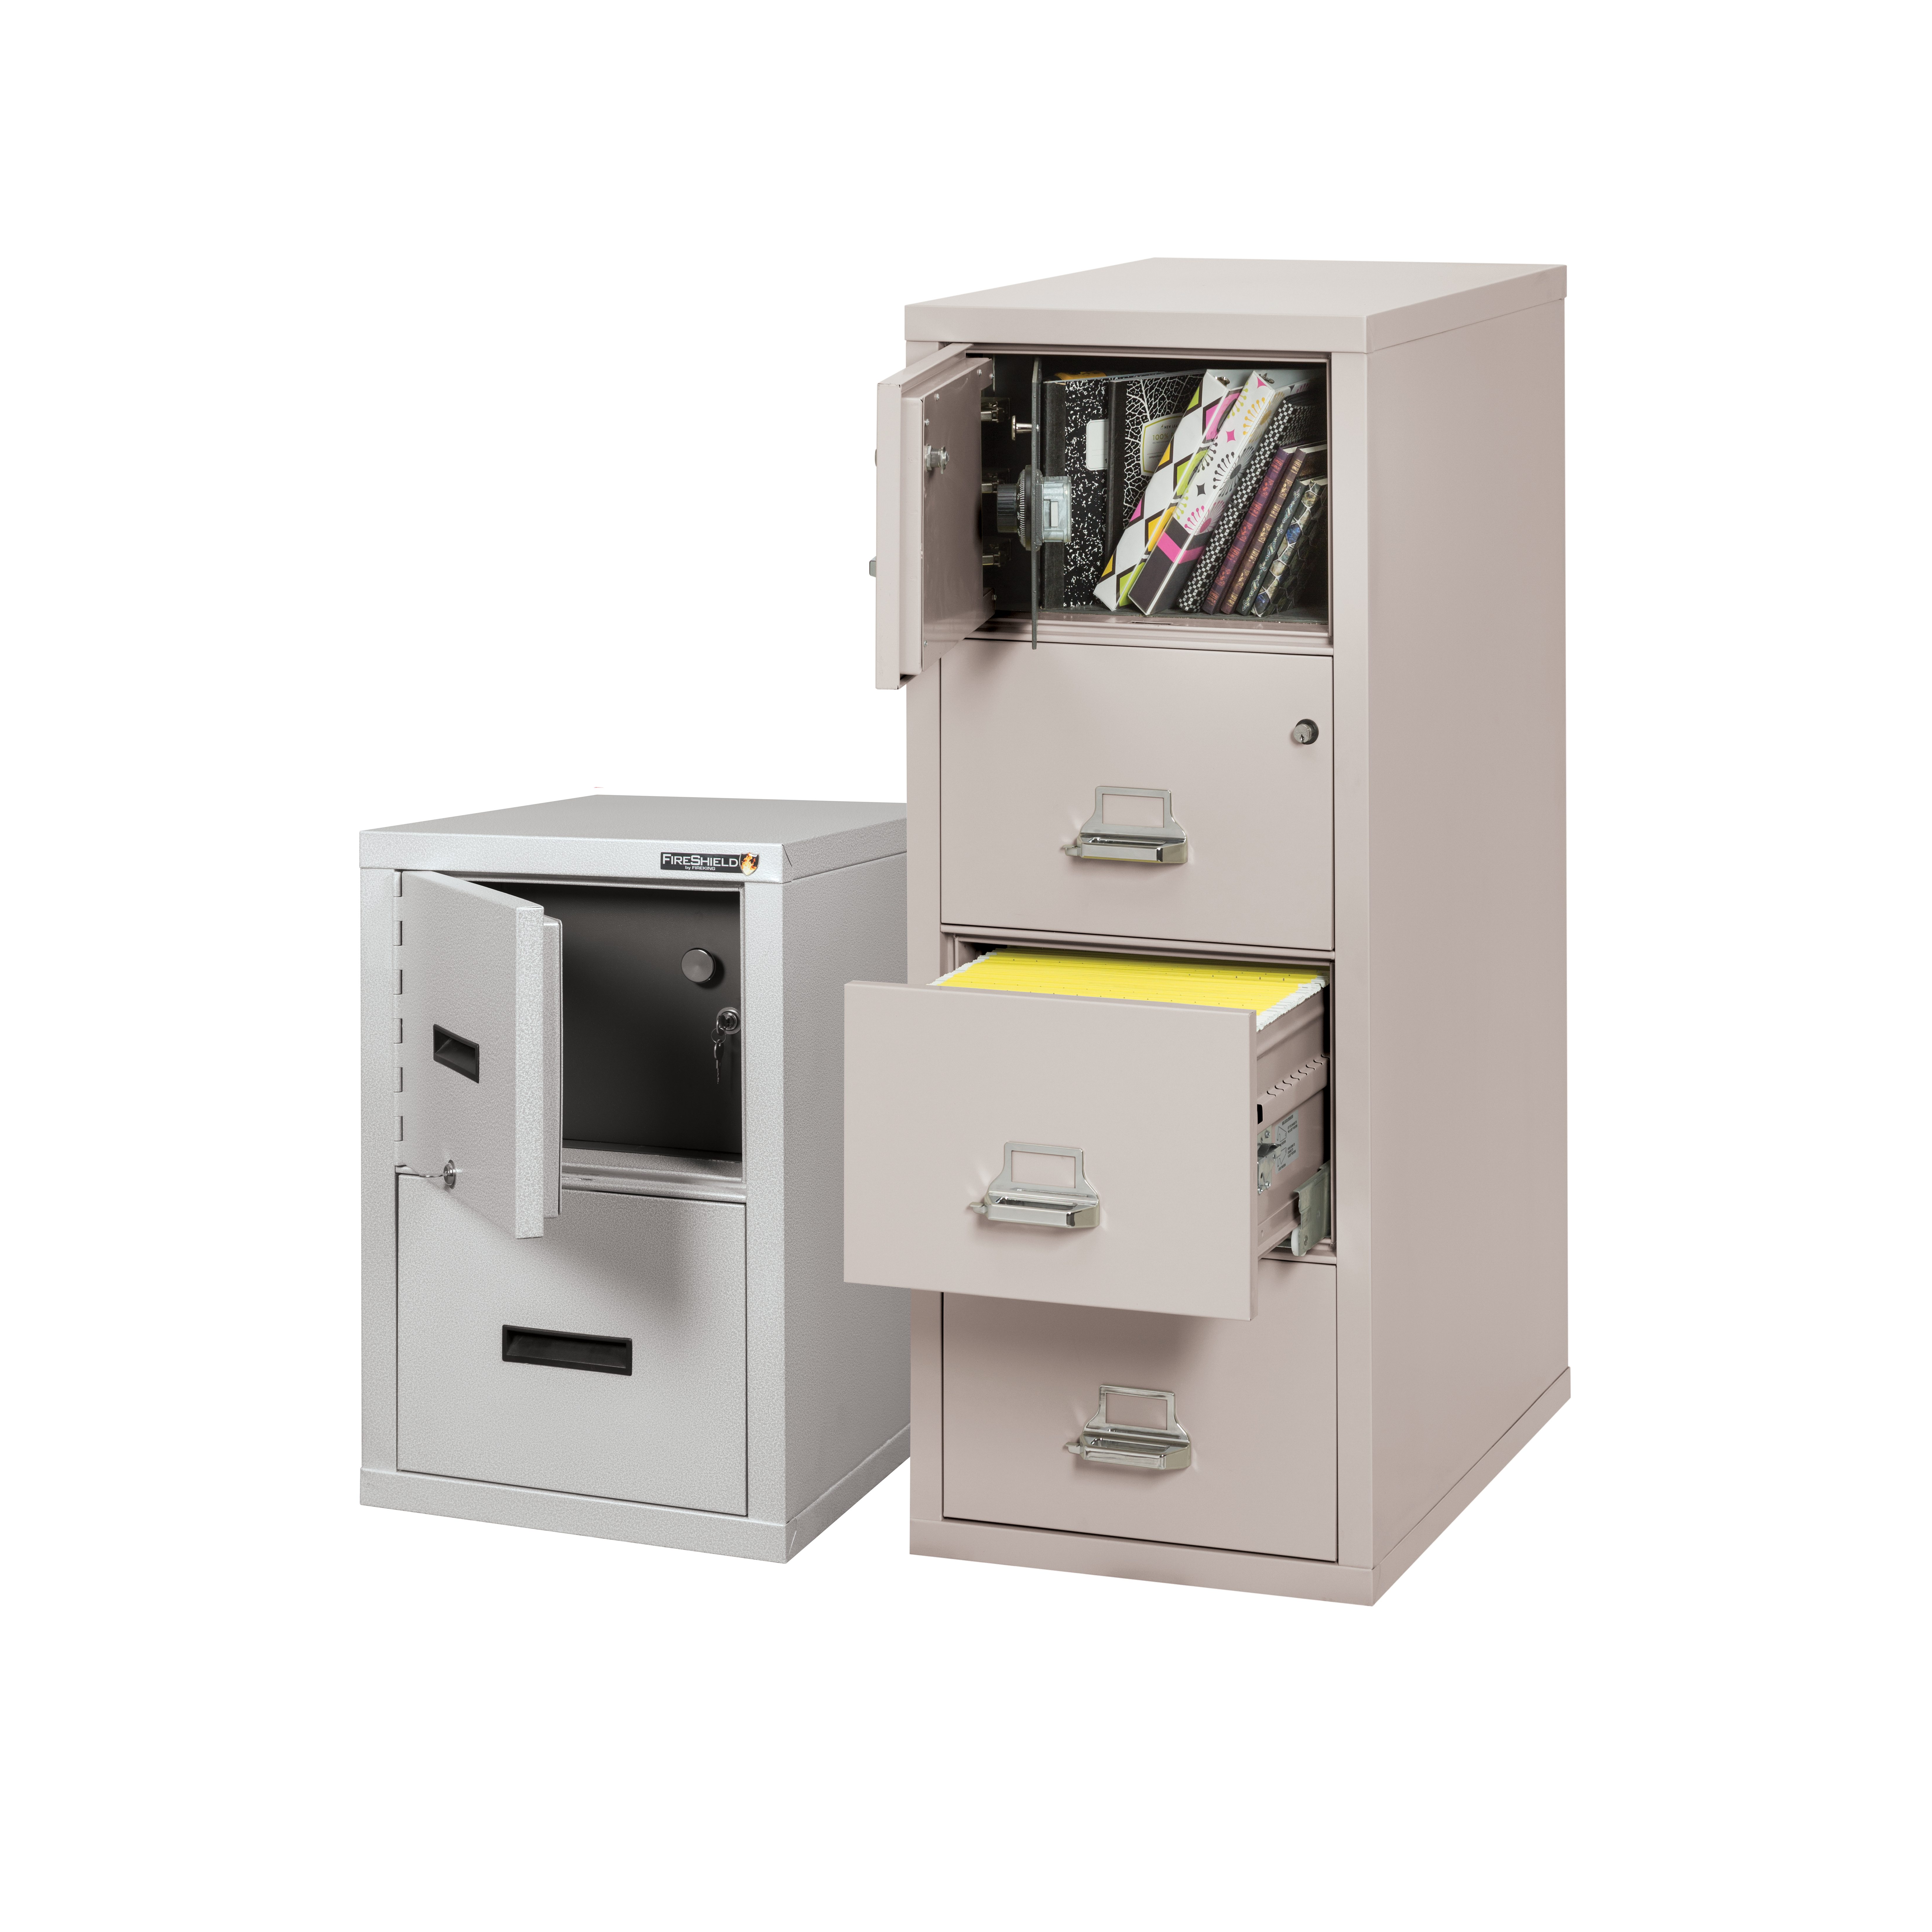 Safe In A File Cabinets Fireking Security Group pertaining to dimensions 6600 X 6600